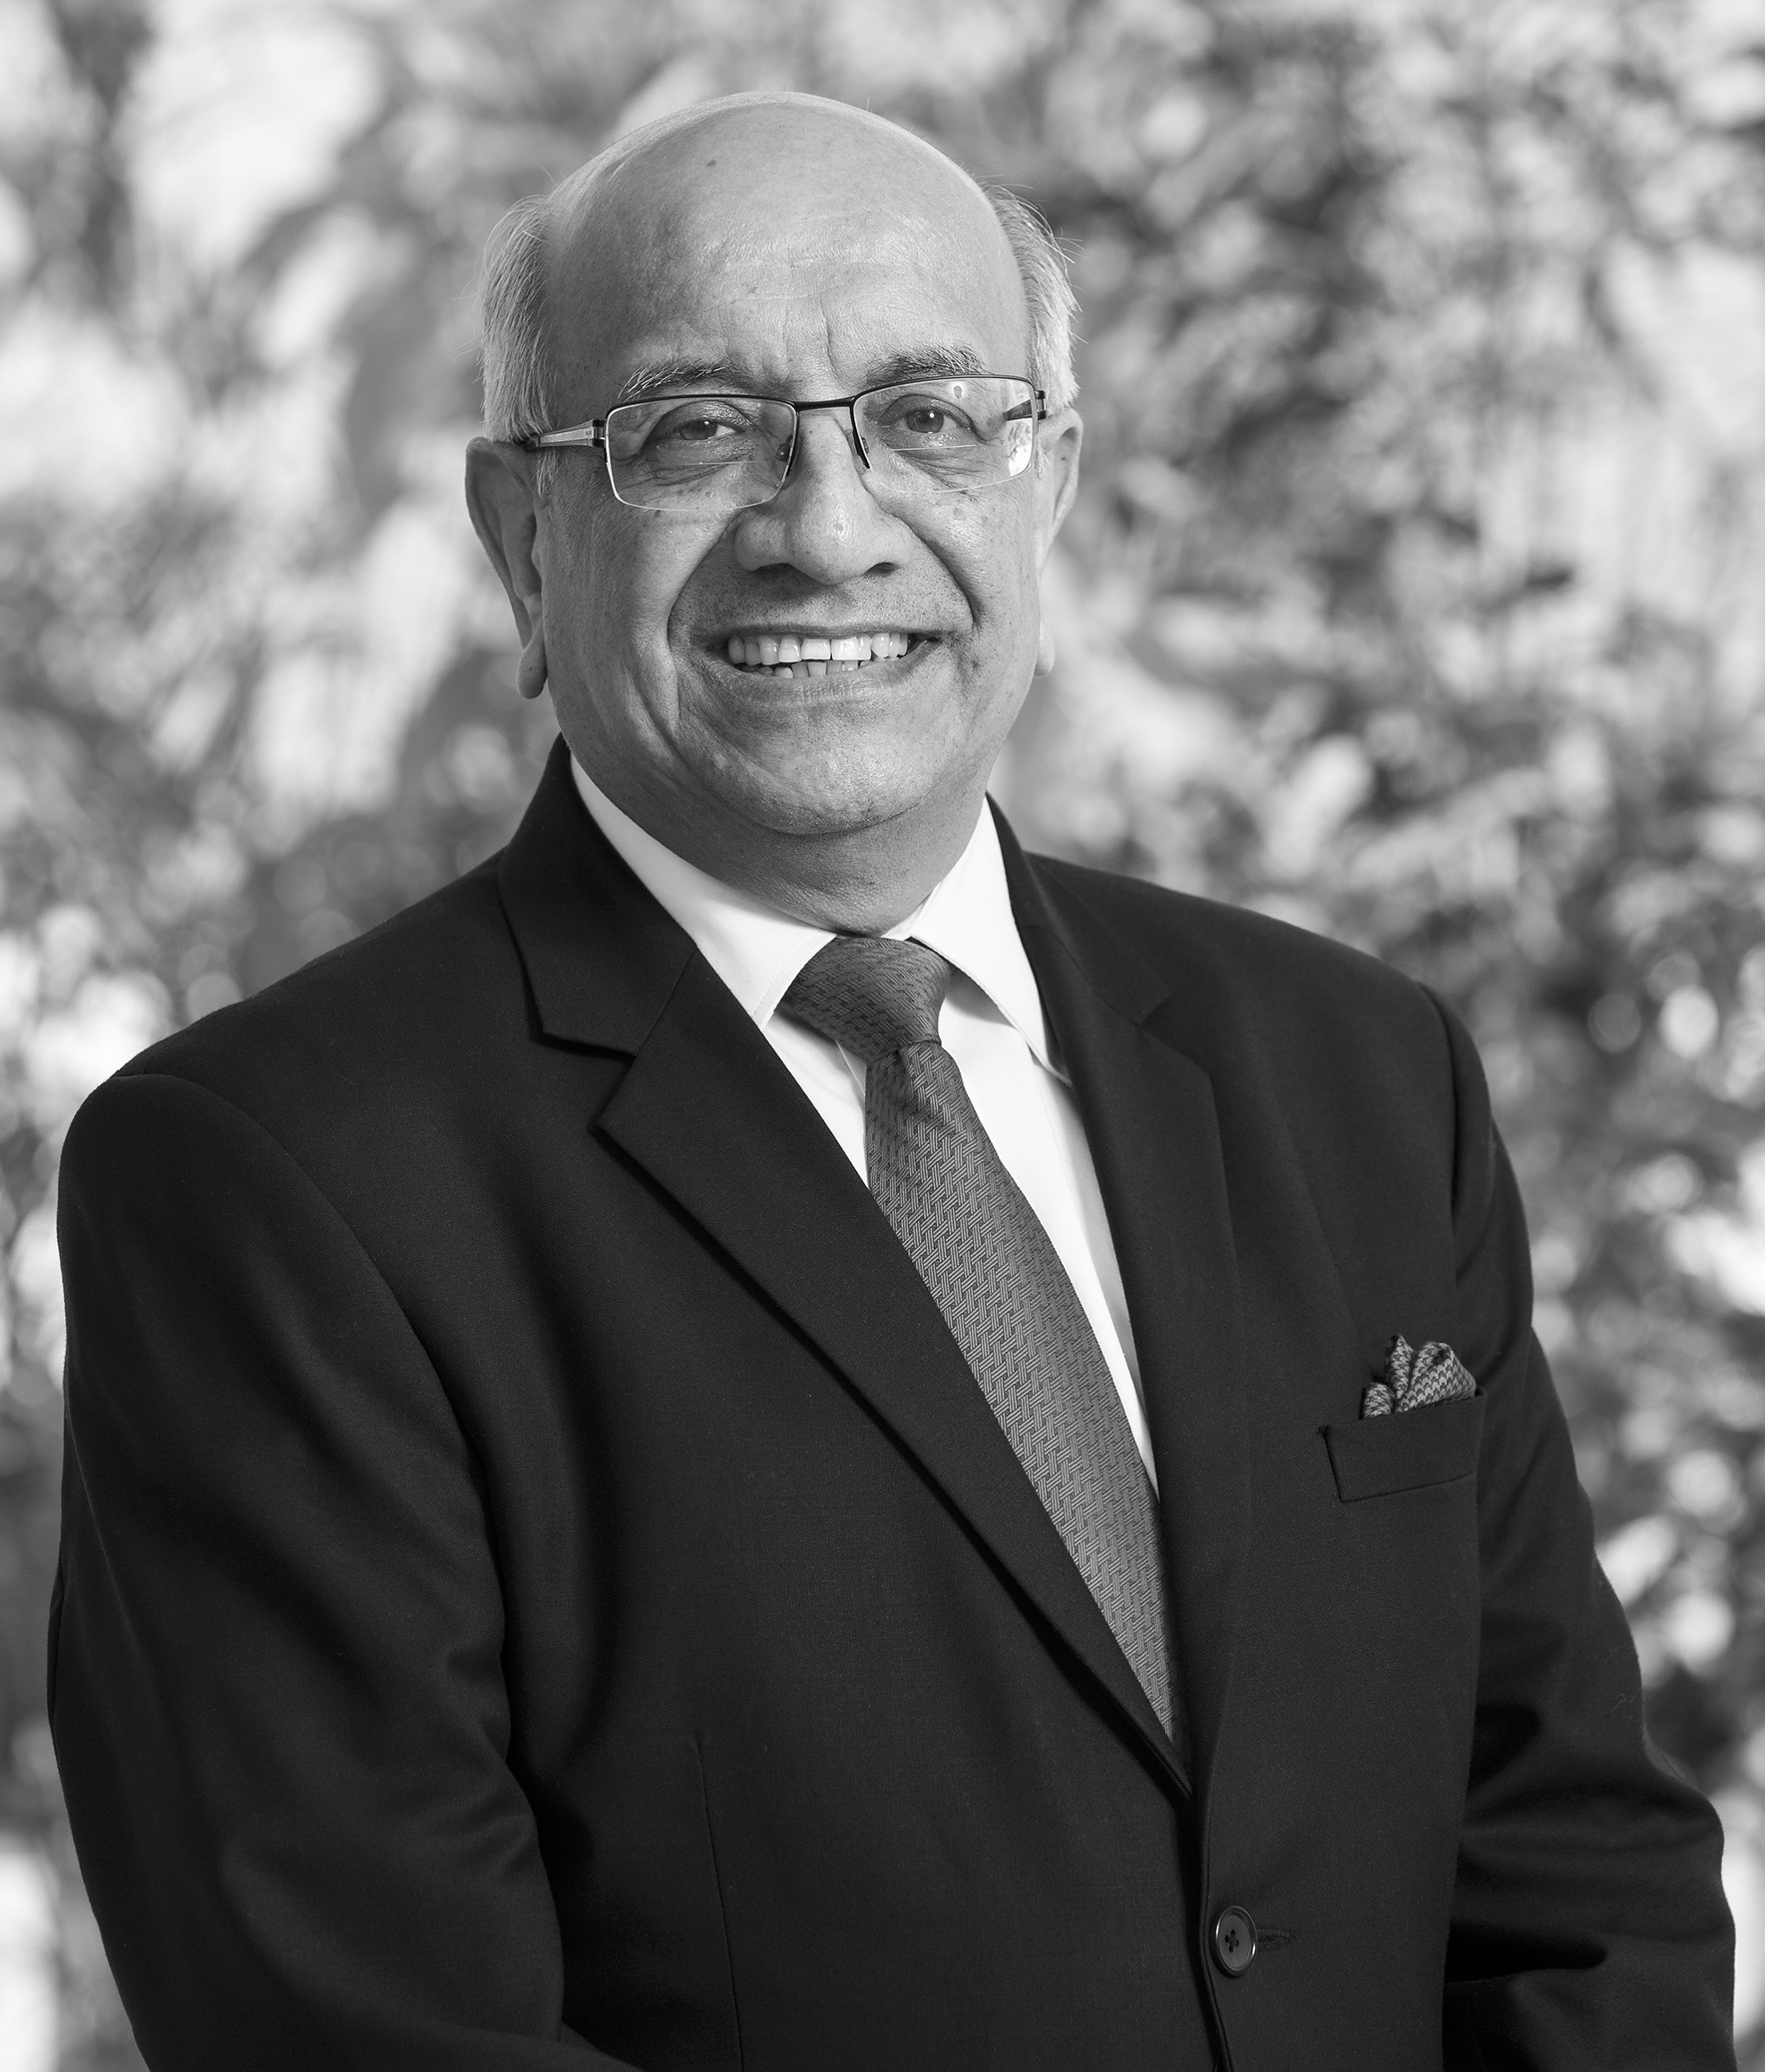 Som Mittal in black and white wearing a suit, tie and glasses, standing at an angle and looking into the camera smiling.